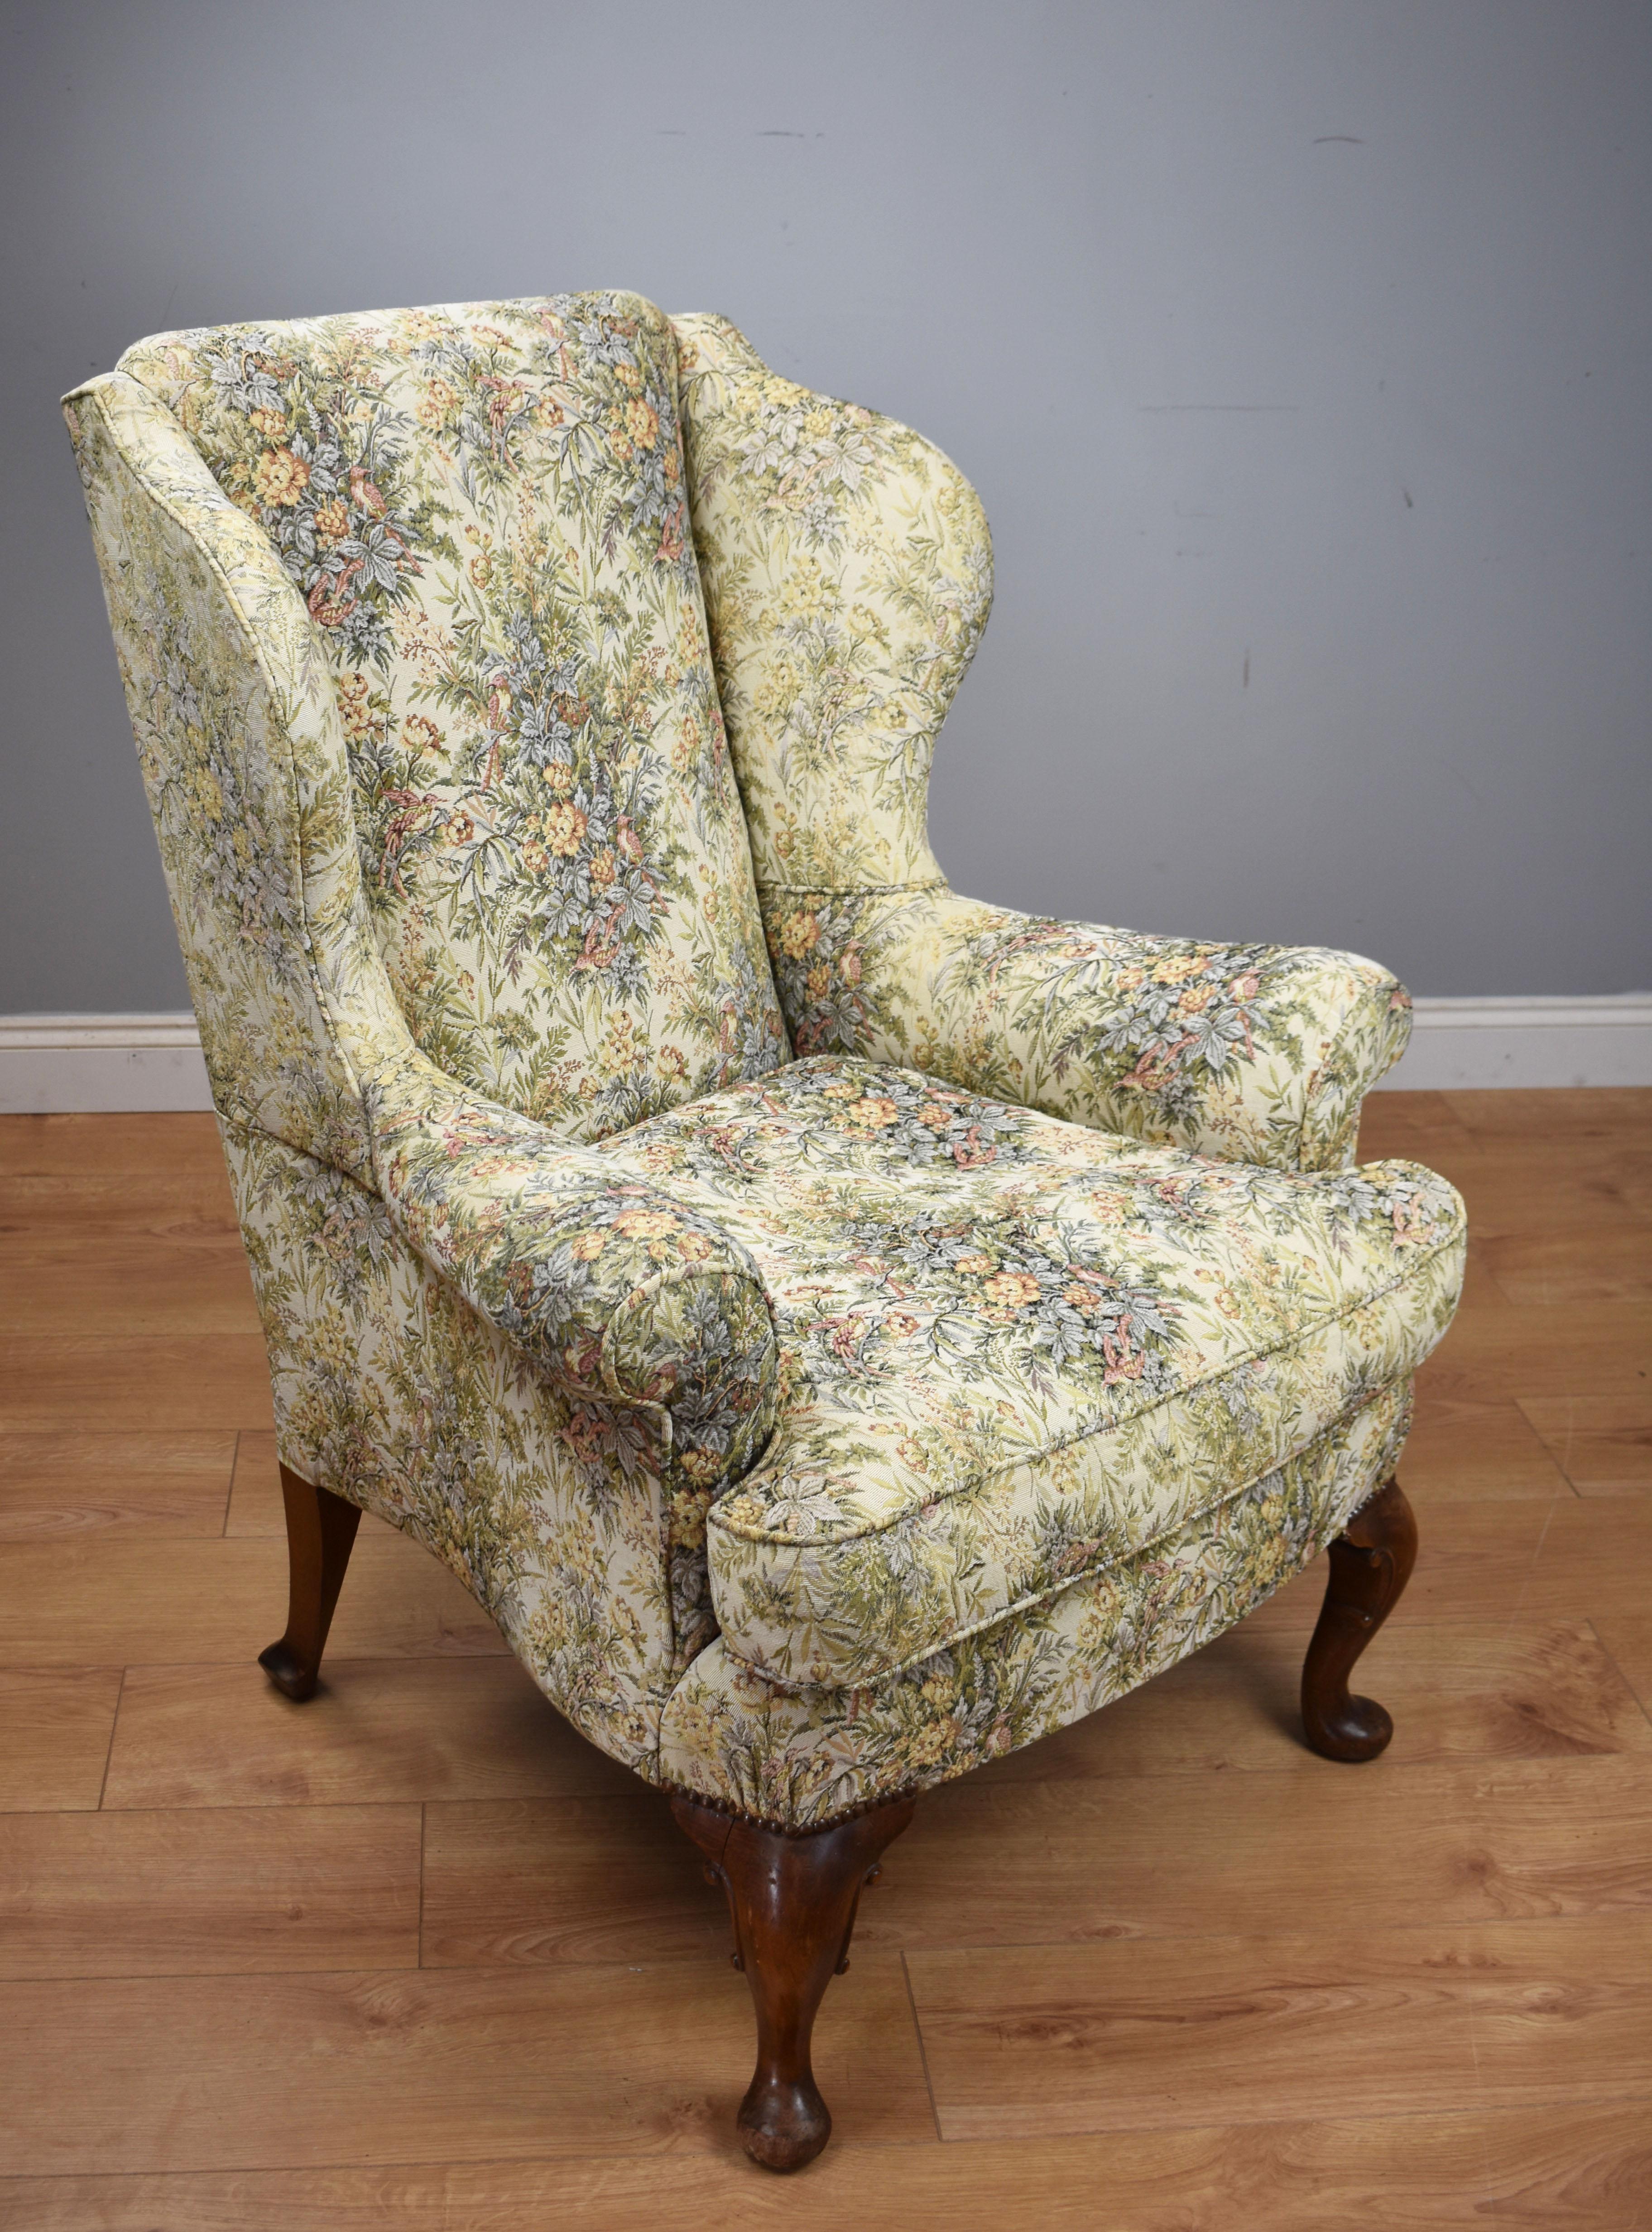 For sale is a good quality 19th century Victorian walnut framed wing back armchair. Upholstered in a floral fabric, standing on squat cabriole legs, the chair is in good condition, being structurally sound and the upholstery being in good